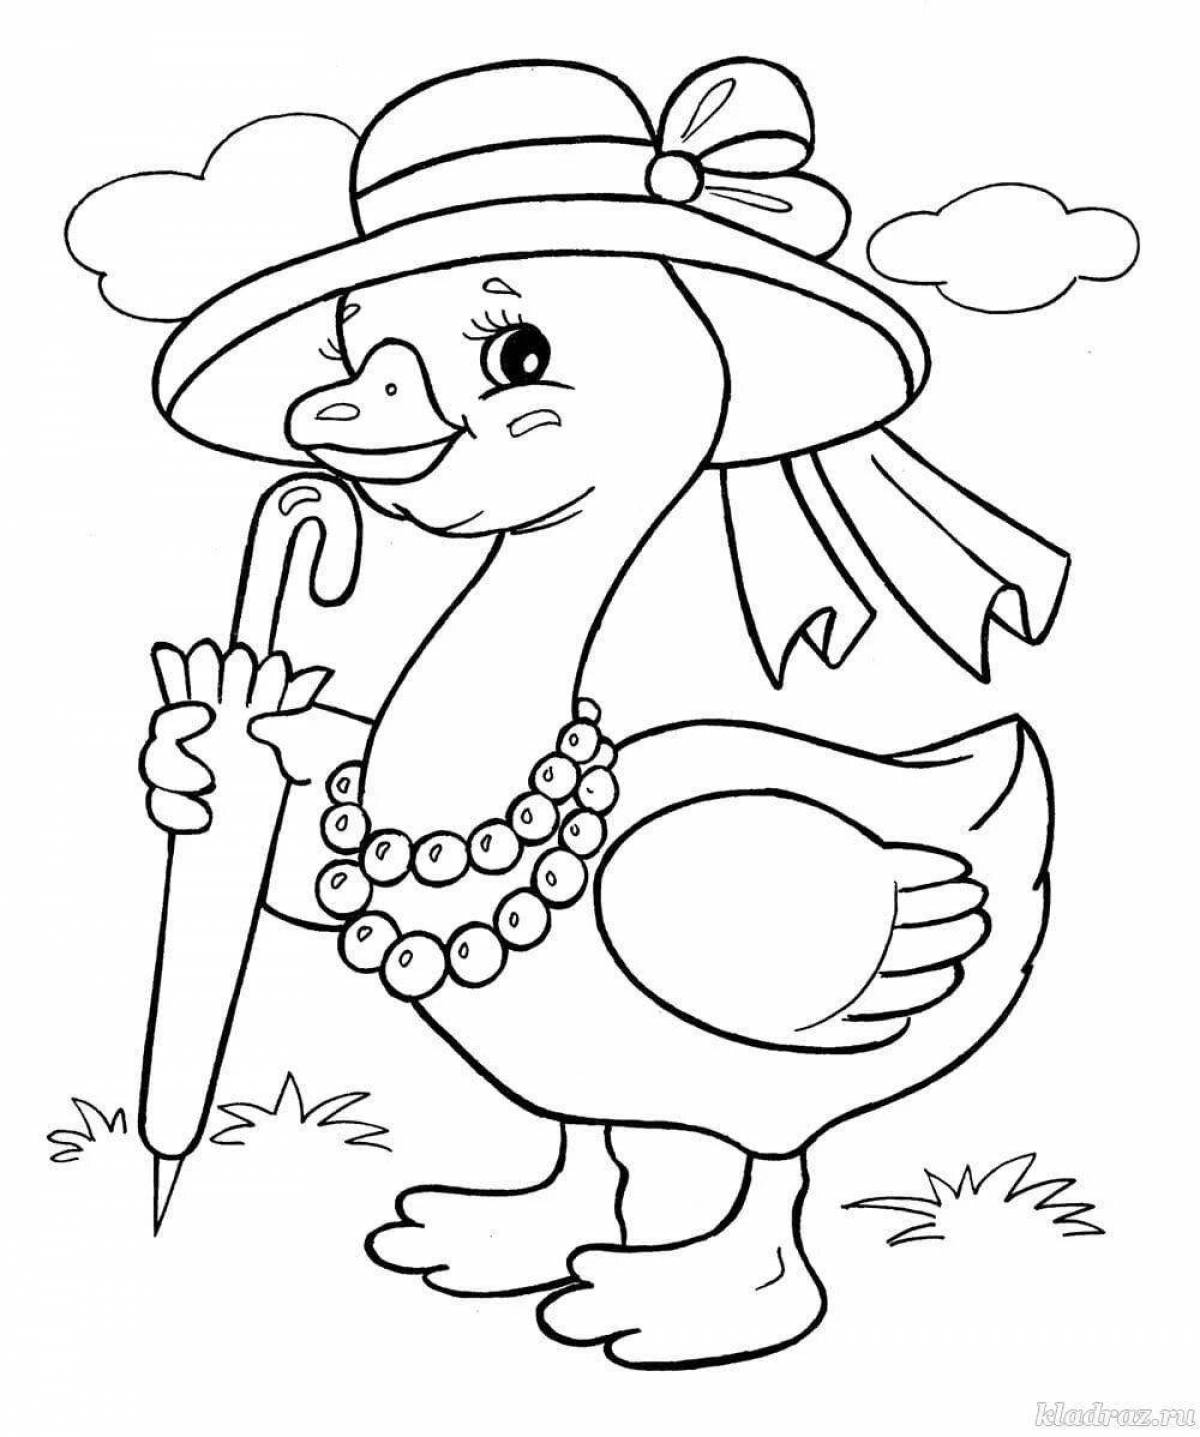 Joyful collection of coloring pages for children